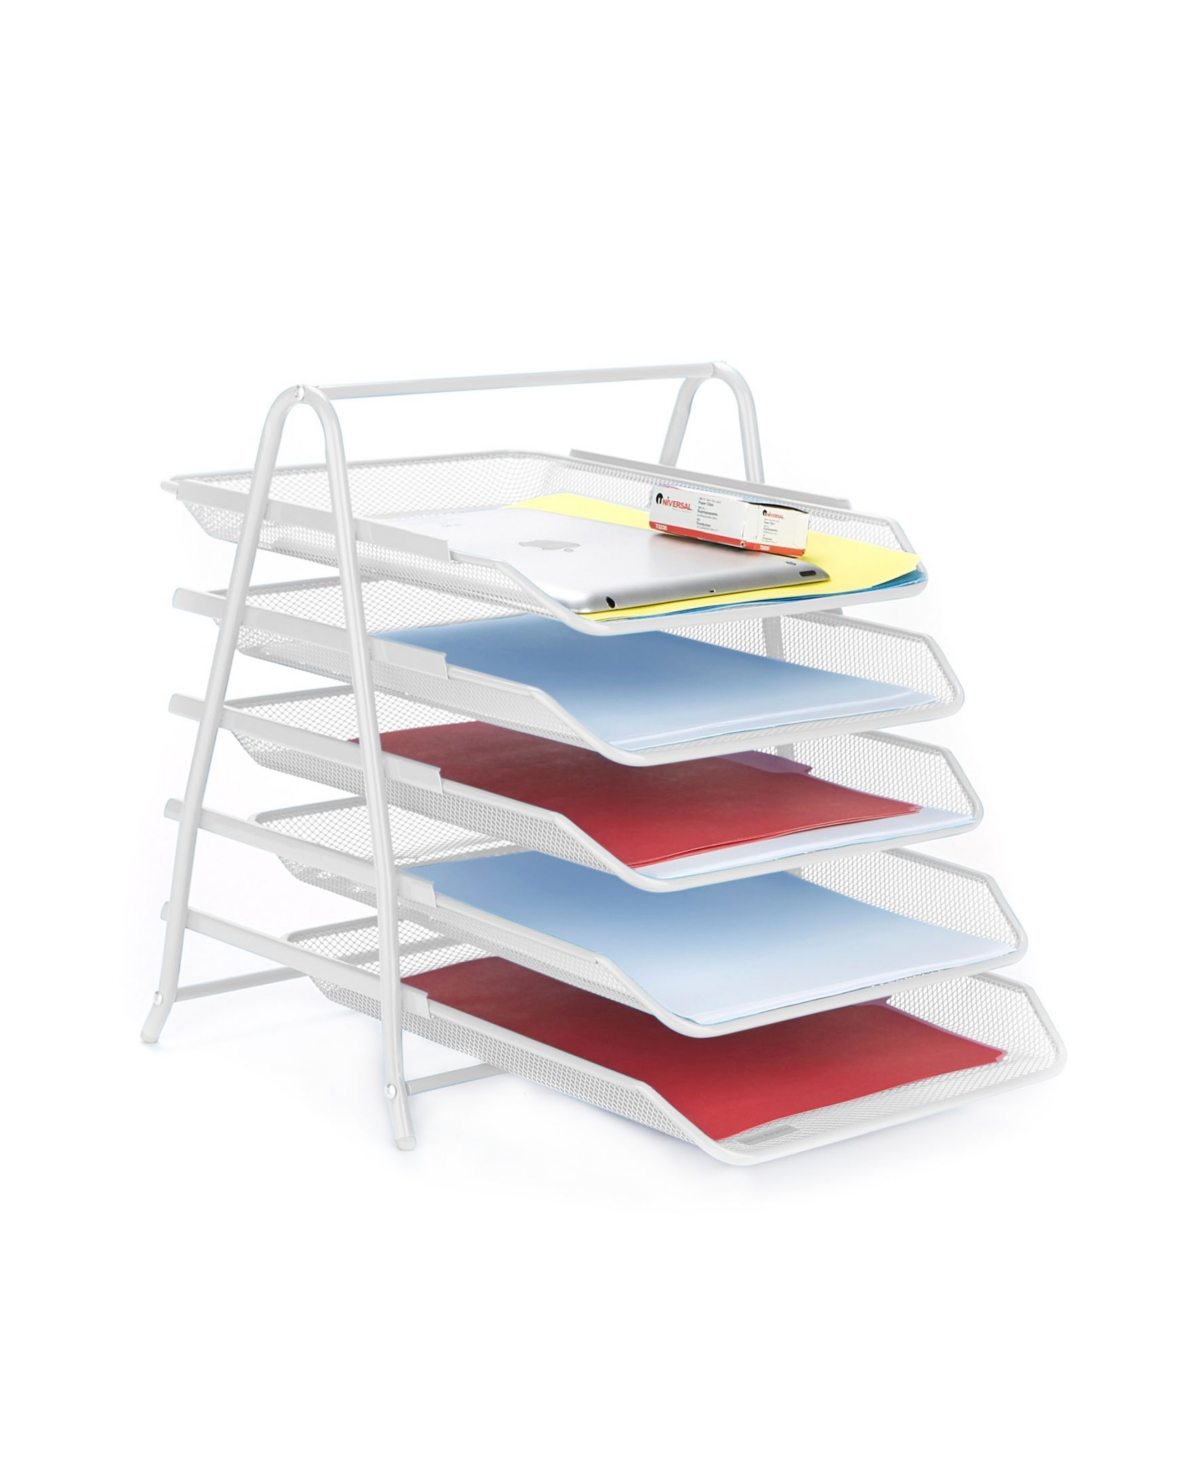 5 Tier Mesh Paper File Tray, Desk Organizer with 5 Sliding Trays - White